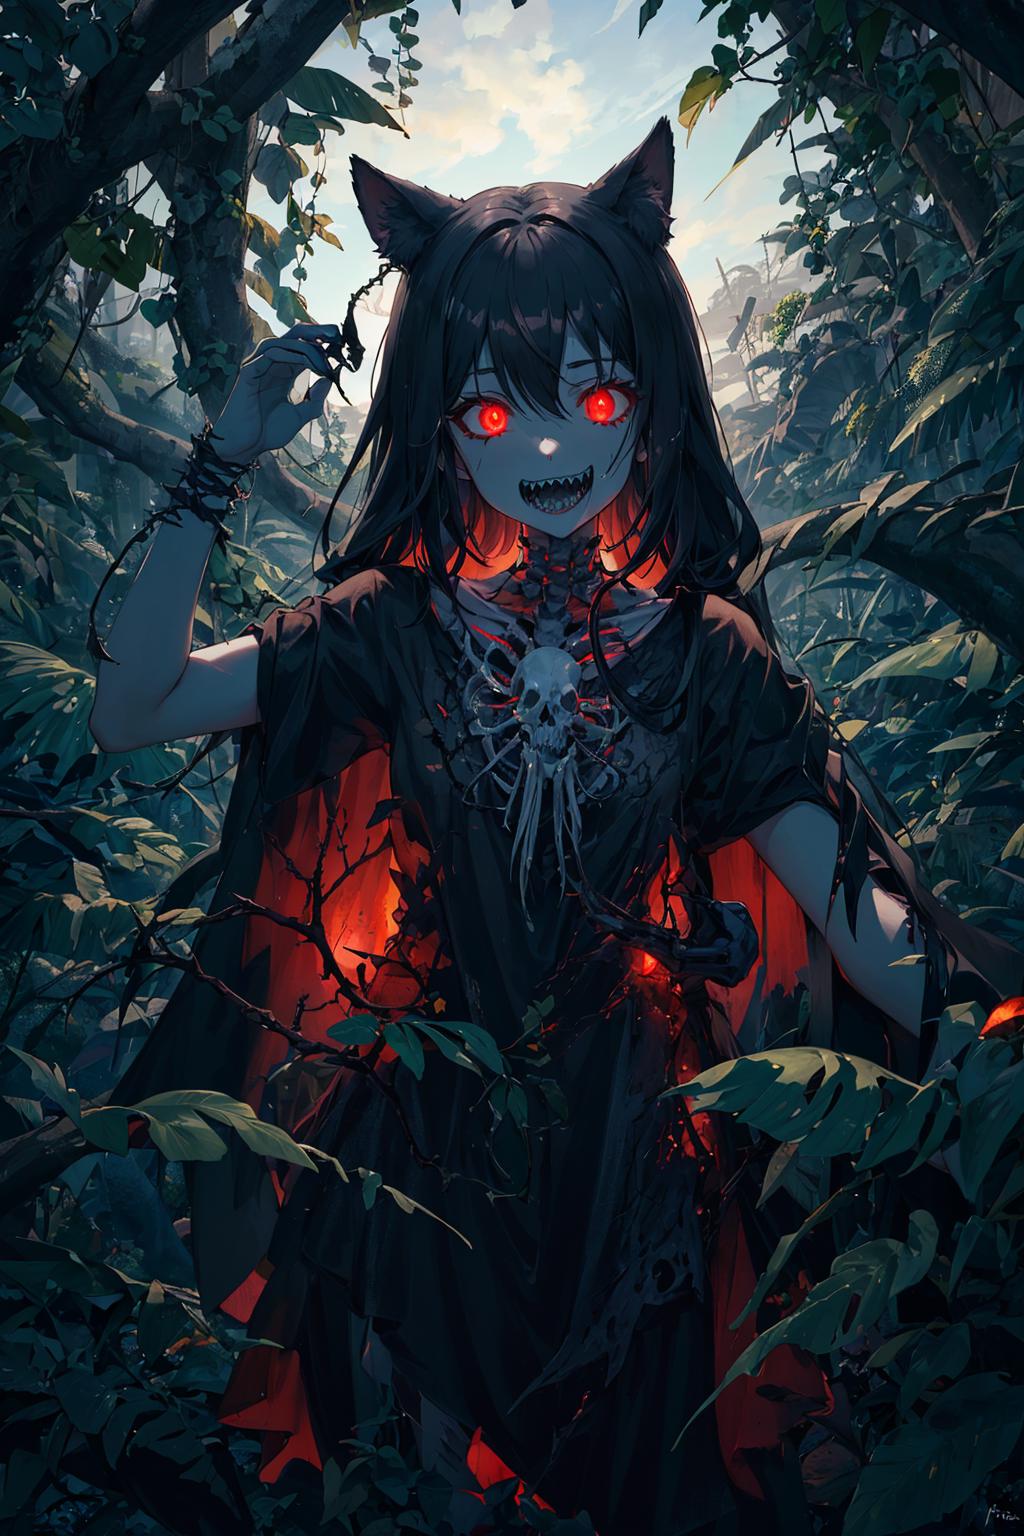 A girl with red eyes and a skull necklace standing in a forest.